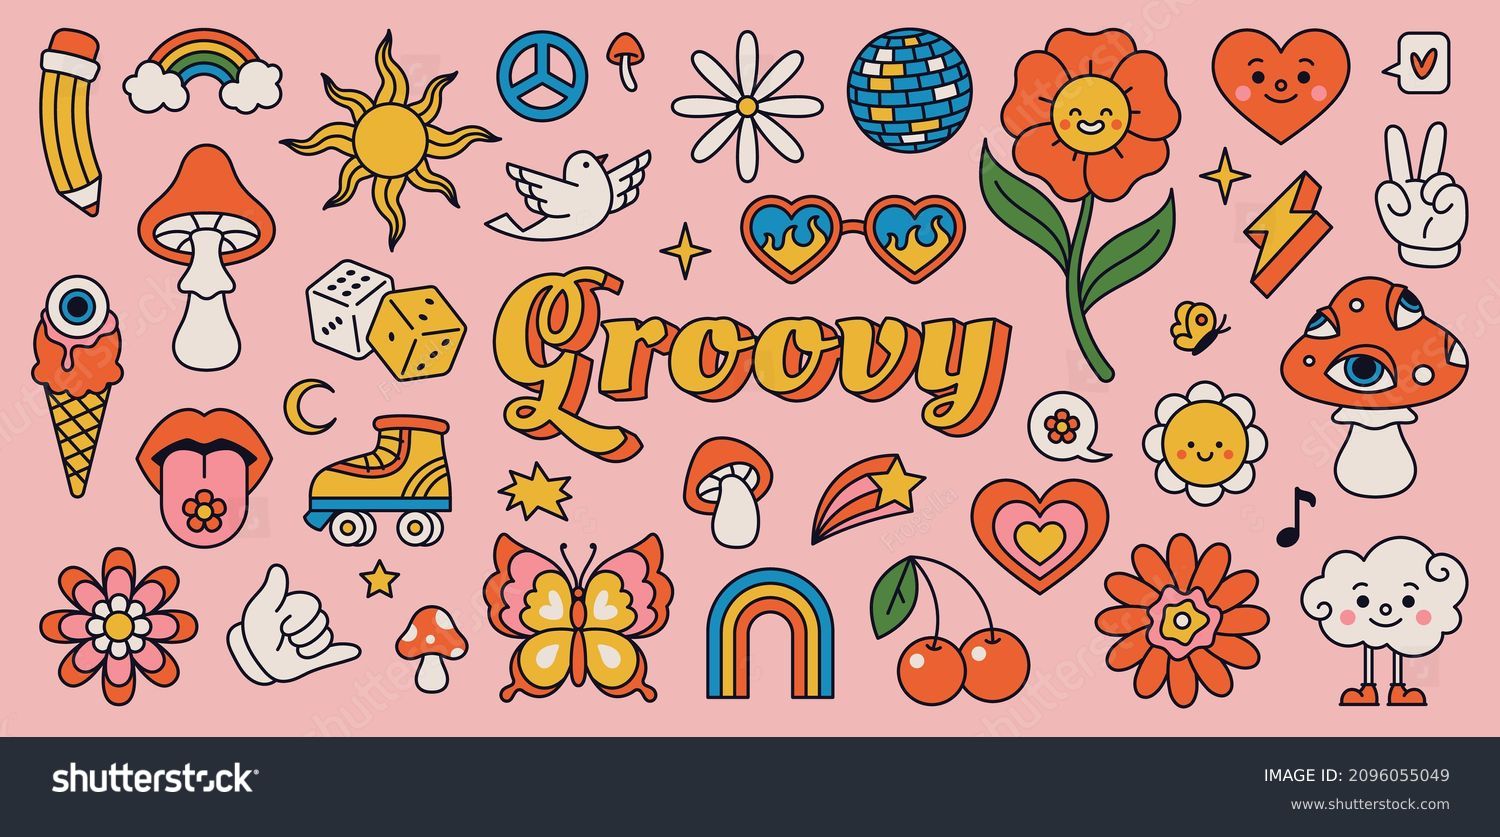 Retro 70s hippie stickers, psychedelic groovy elements. Cartoon funky mushrooms, flowers, rainbow, vintage hippy style element vector set. Decorative disco ball, flying dove and cherries #2096055049